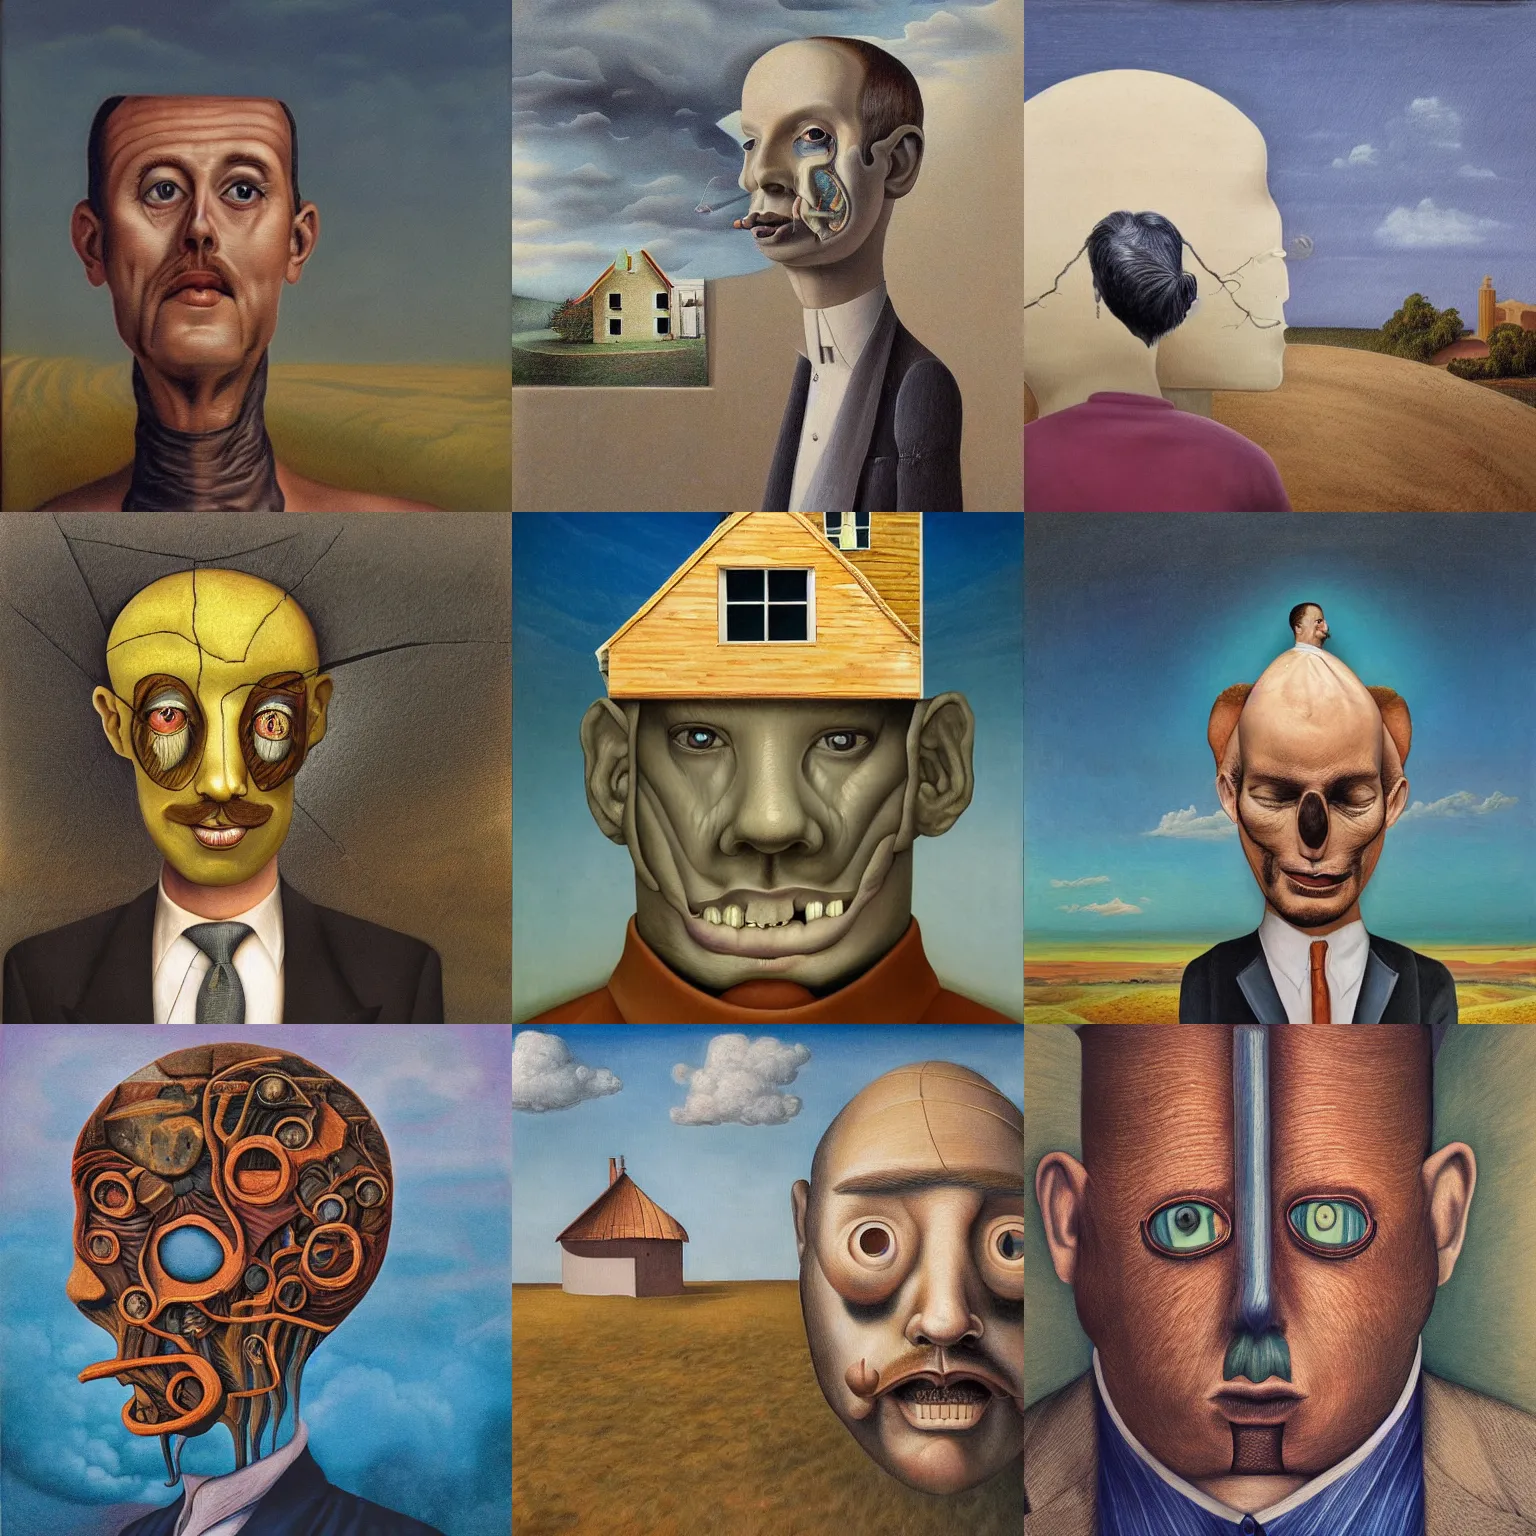 Prompt: A detailed surrealism painting of a man with a head looking like a house